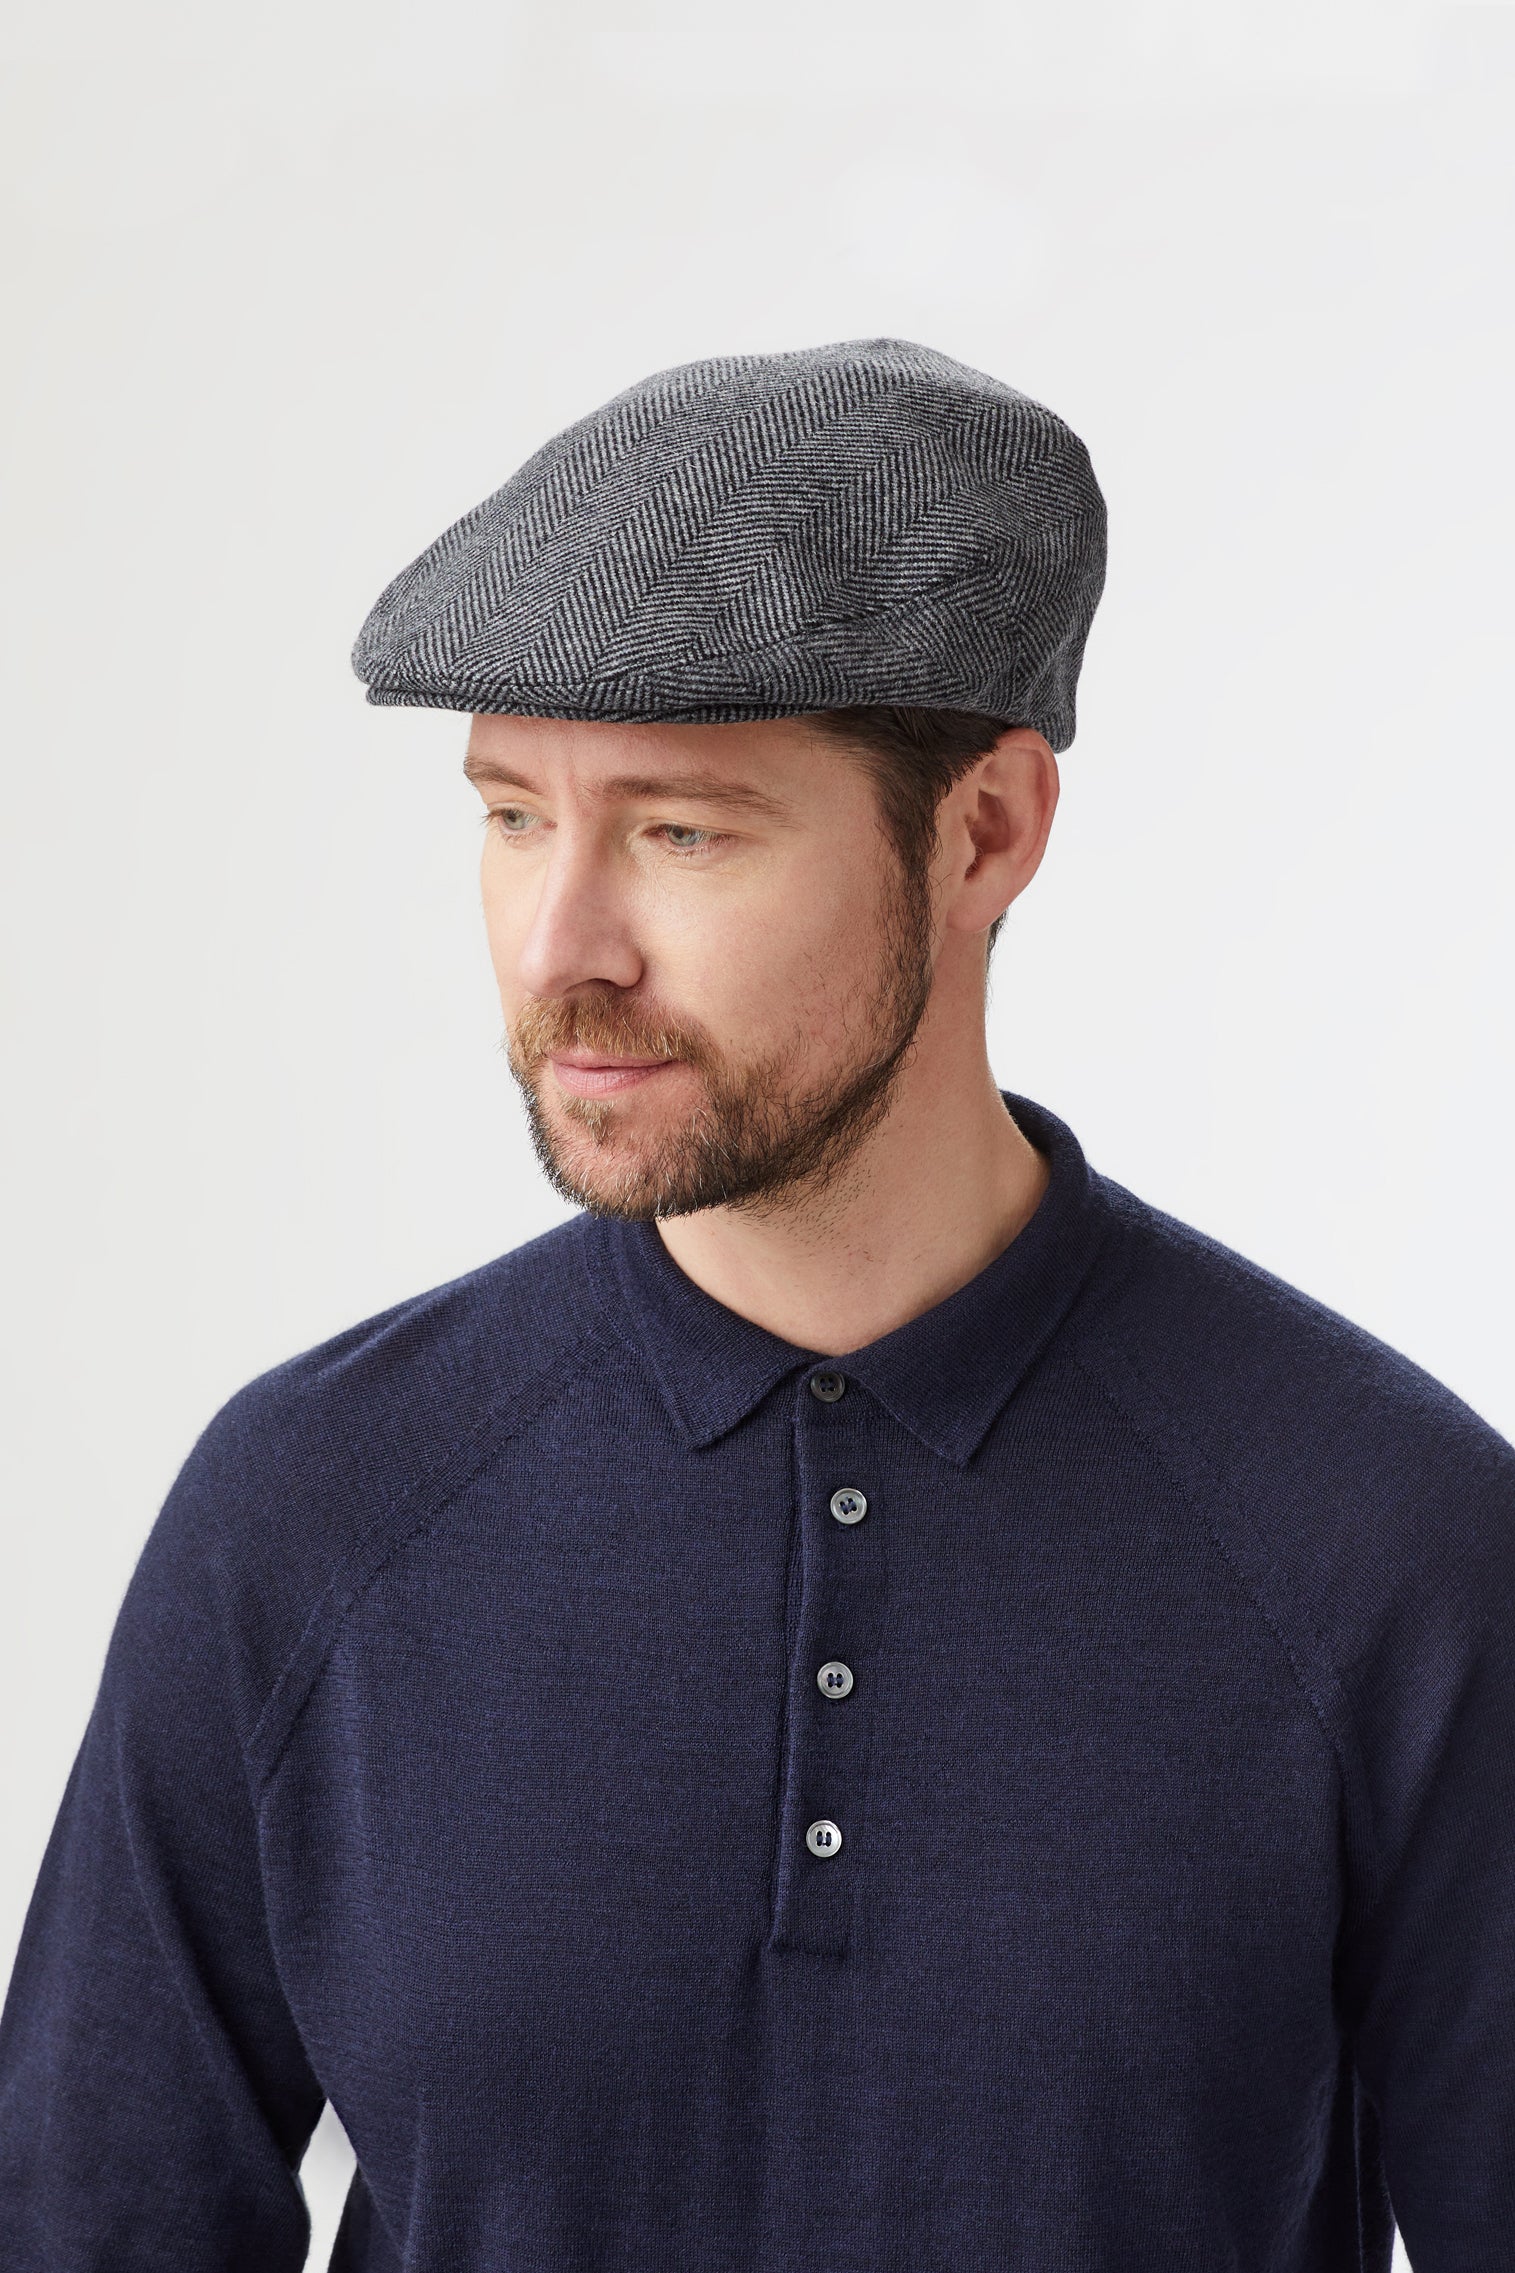 Gill flat cap - Valentines Day Gift Ideas - Lock & Co. Hatters London UK